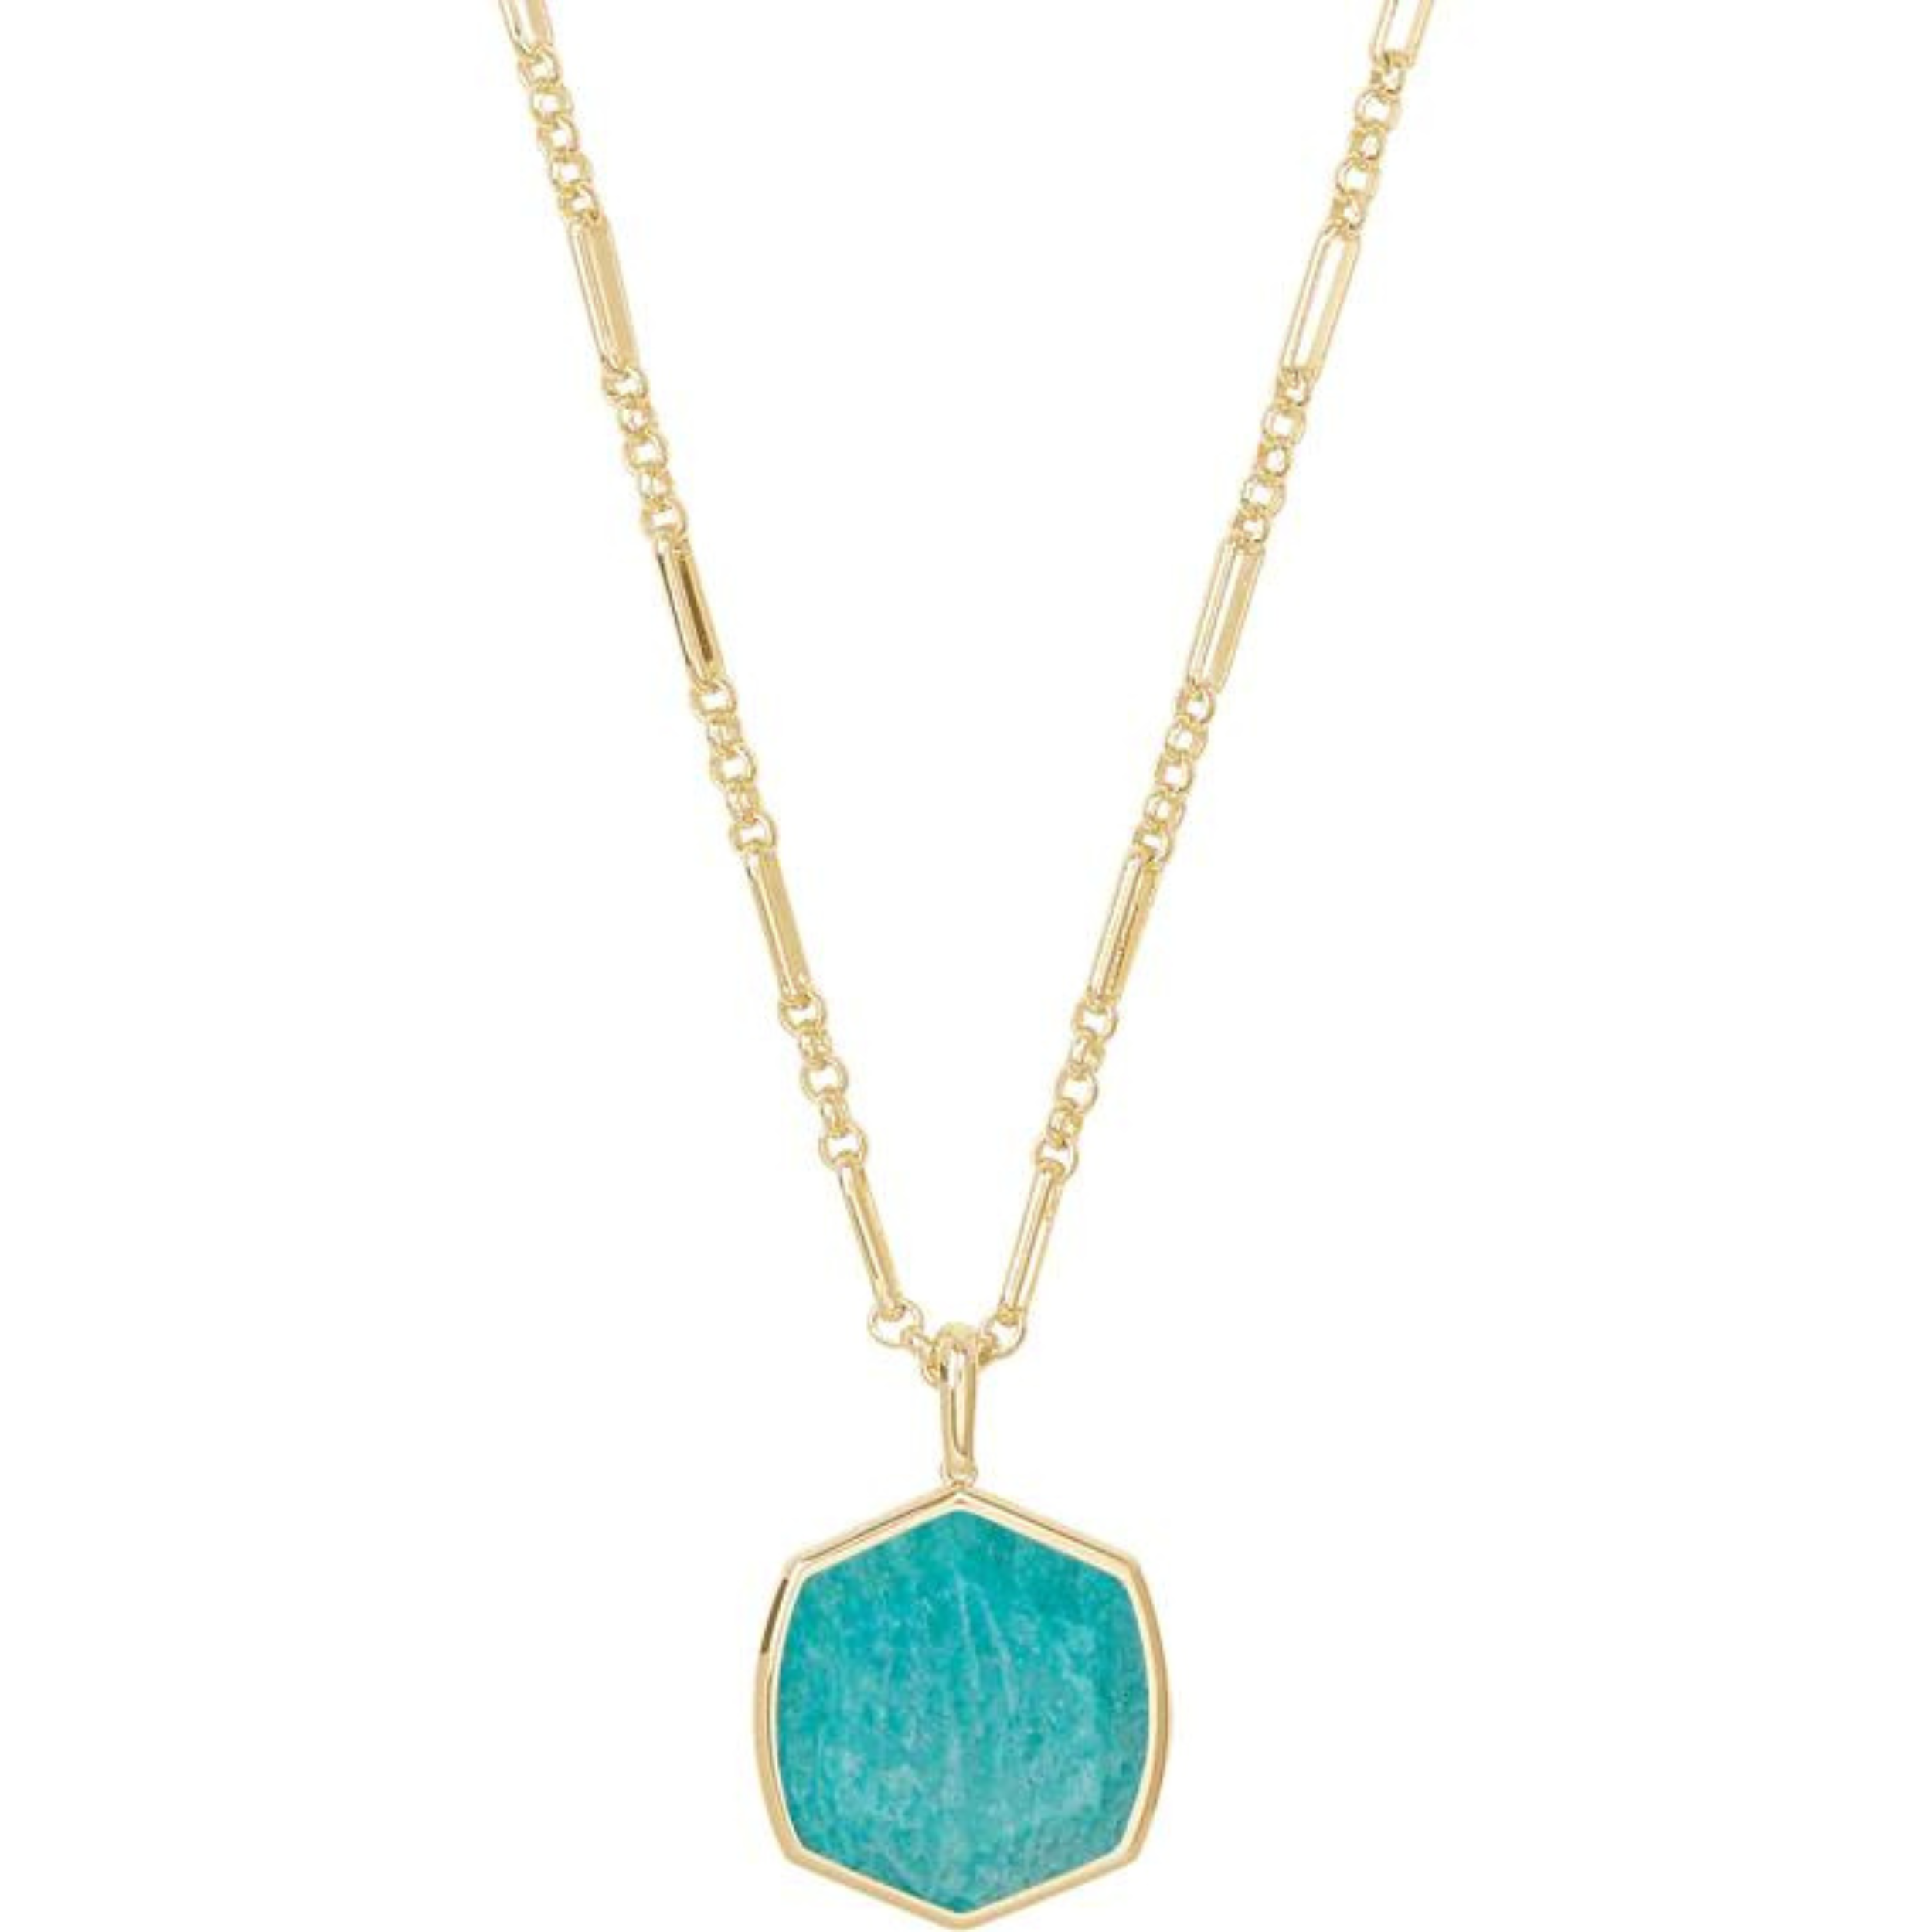 Long gold necklace with a  Dark Teal Amazonite pendant, pictured on a white background.